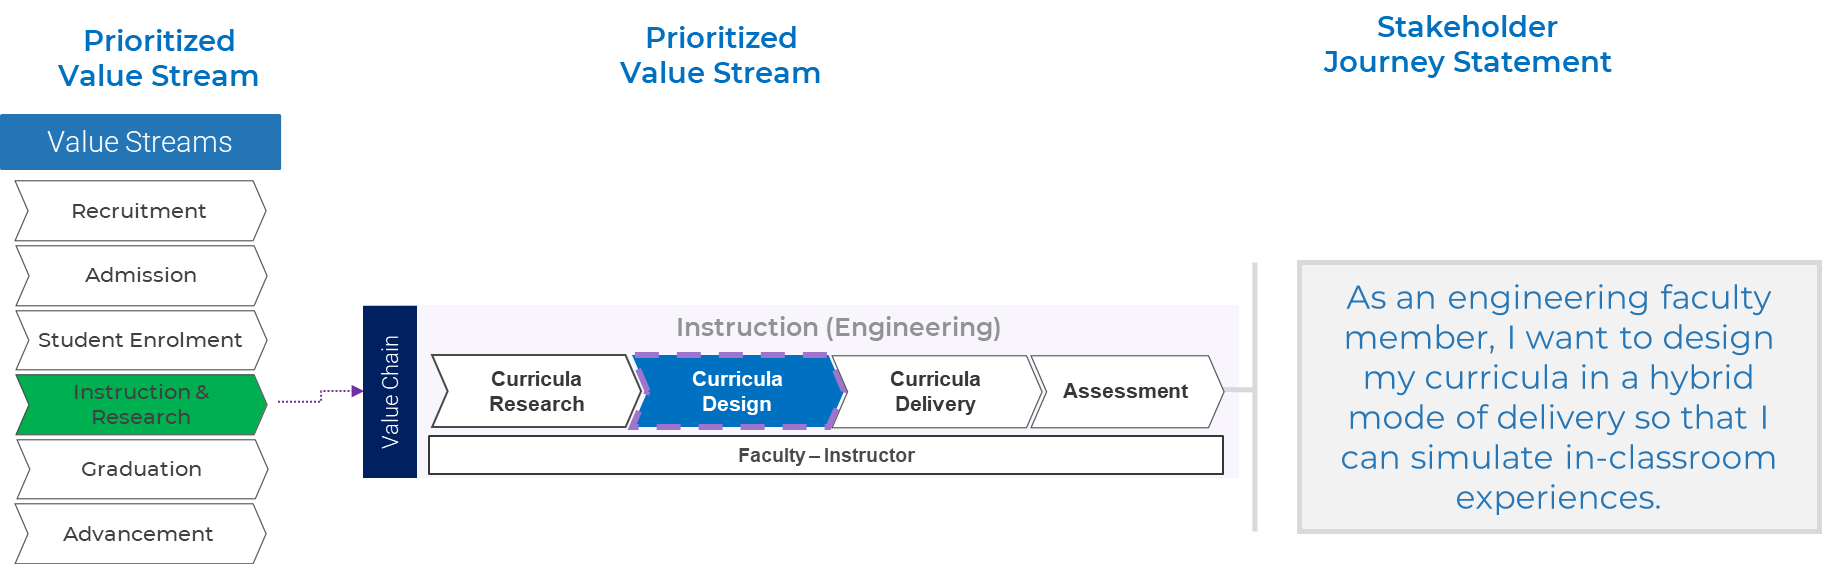 this image contains the instruction(engineering) value chain shown above. next to it is a stakeholder journey statement, which states: As an engineering faculty member, I want to design my curricula in a hybrid mode of delivery so that I can simulate in-classroom experiences. 